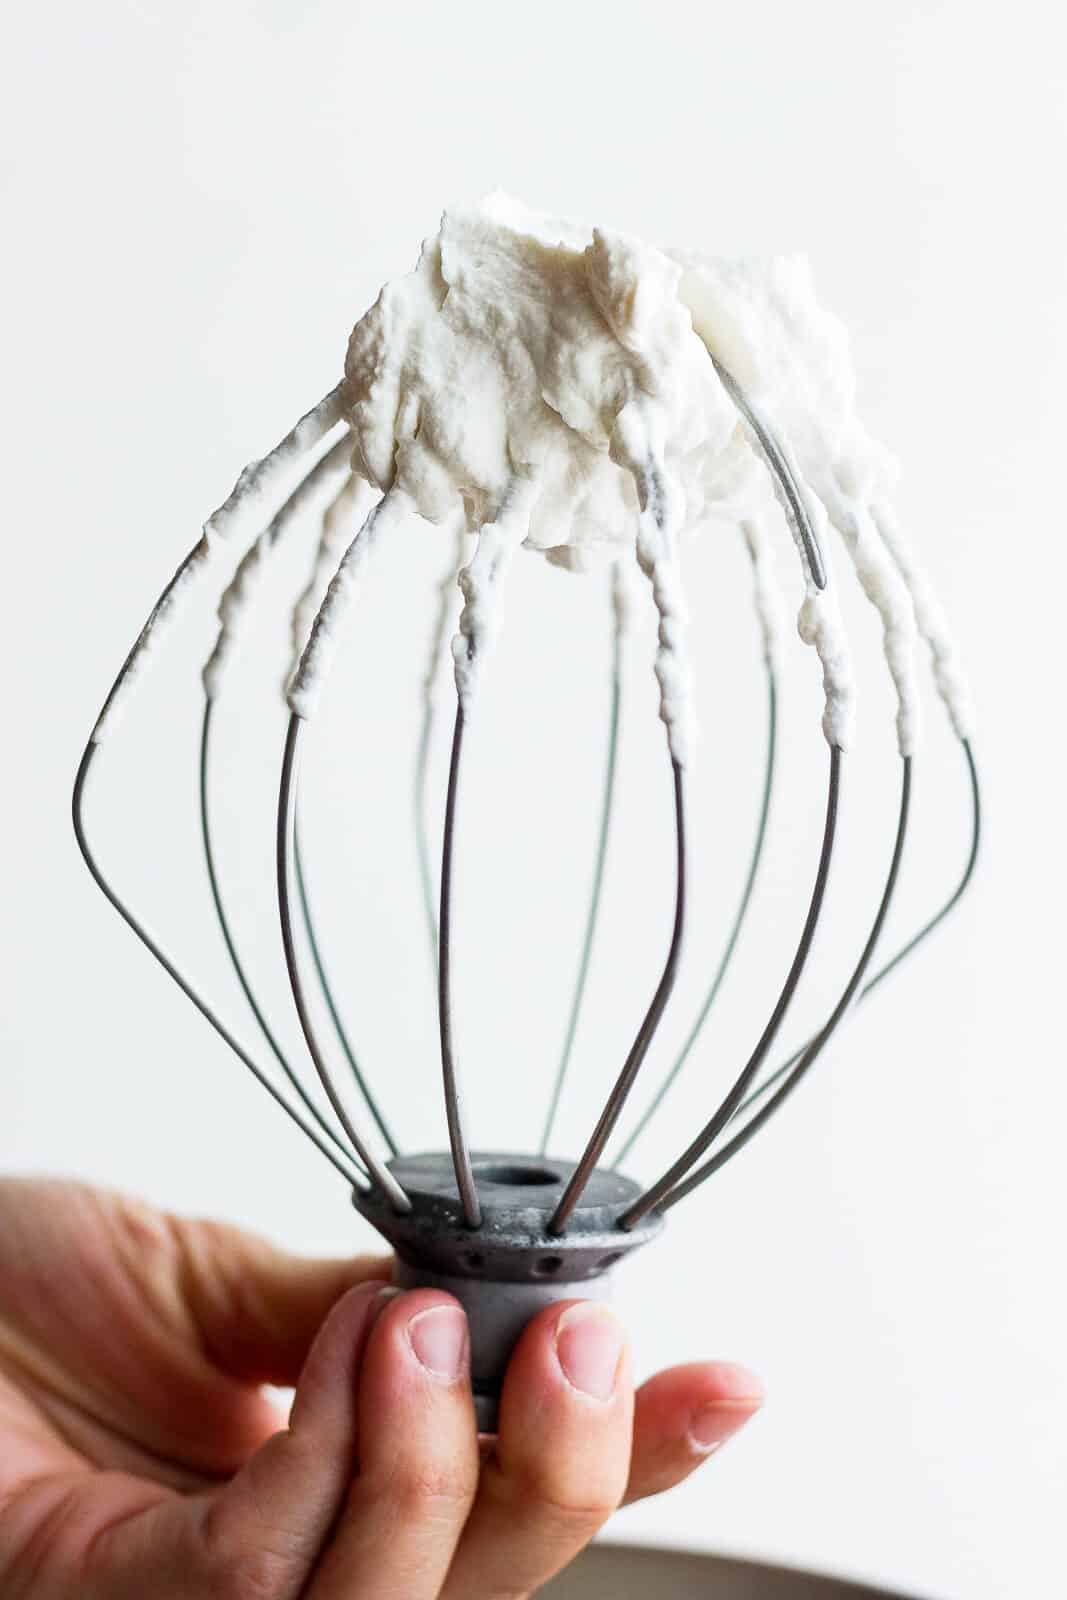 Homemade whipped cream on a whisk attachment for a stand mixer.